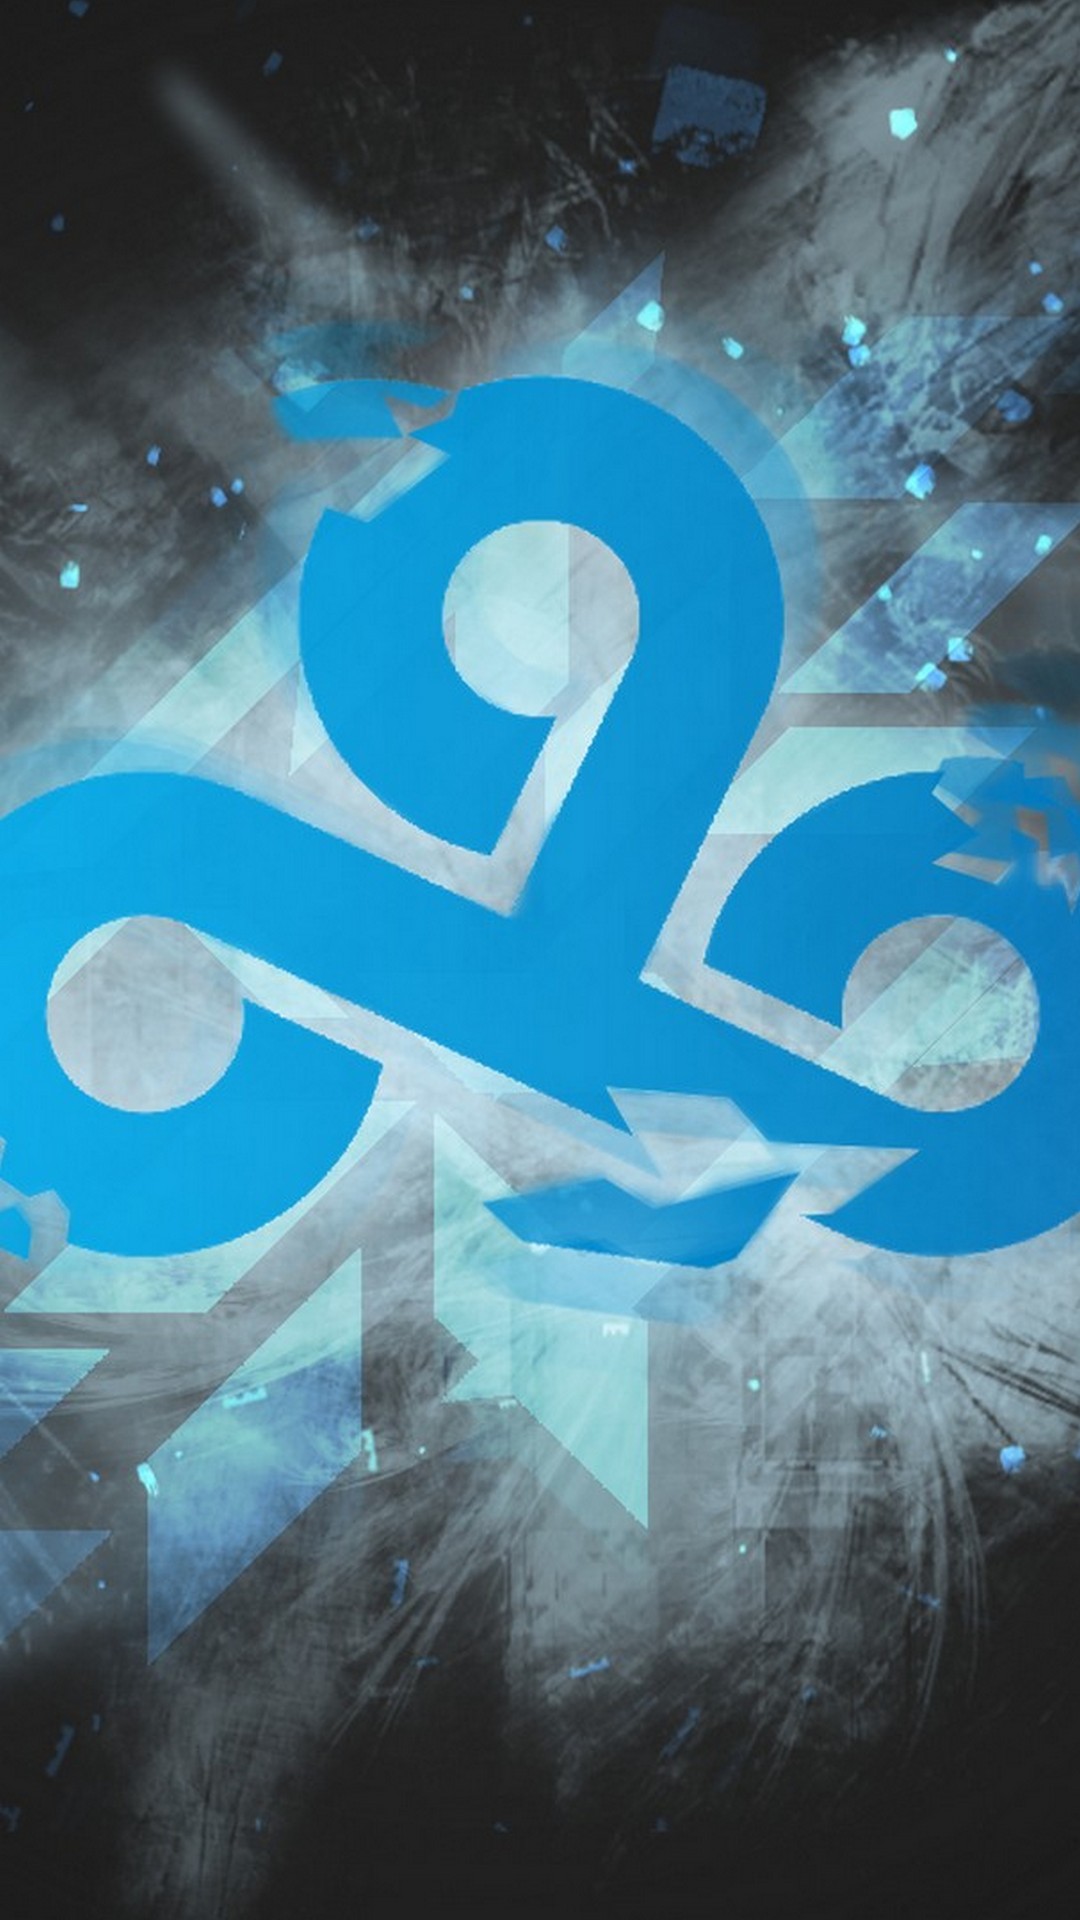 Cloud 9 Hd Wallpapers For Android